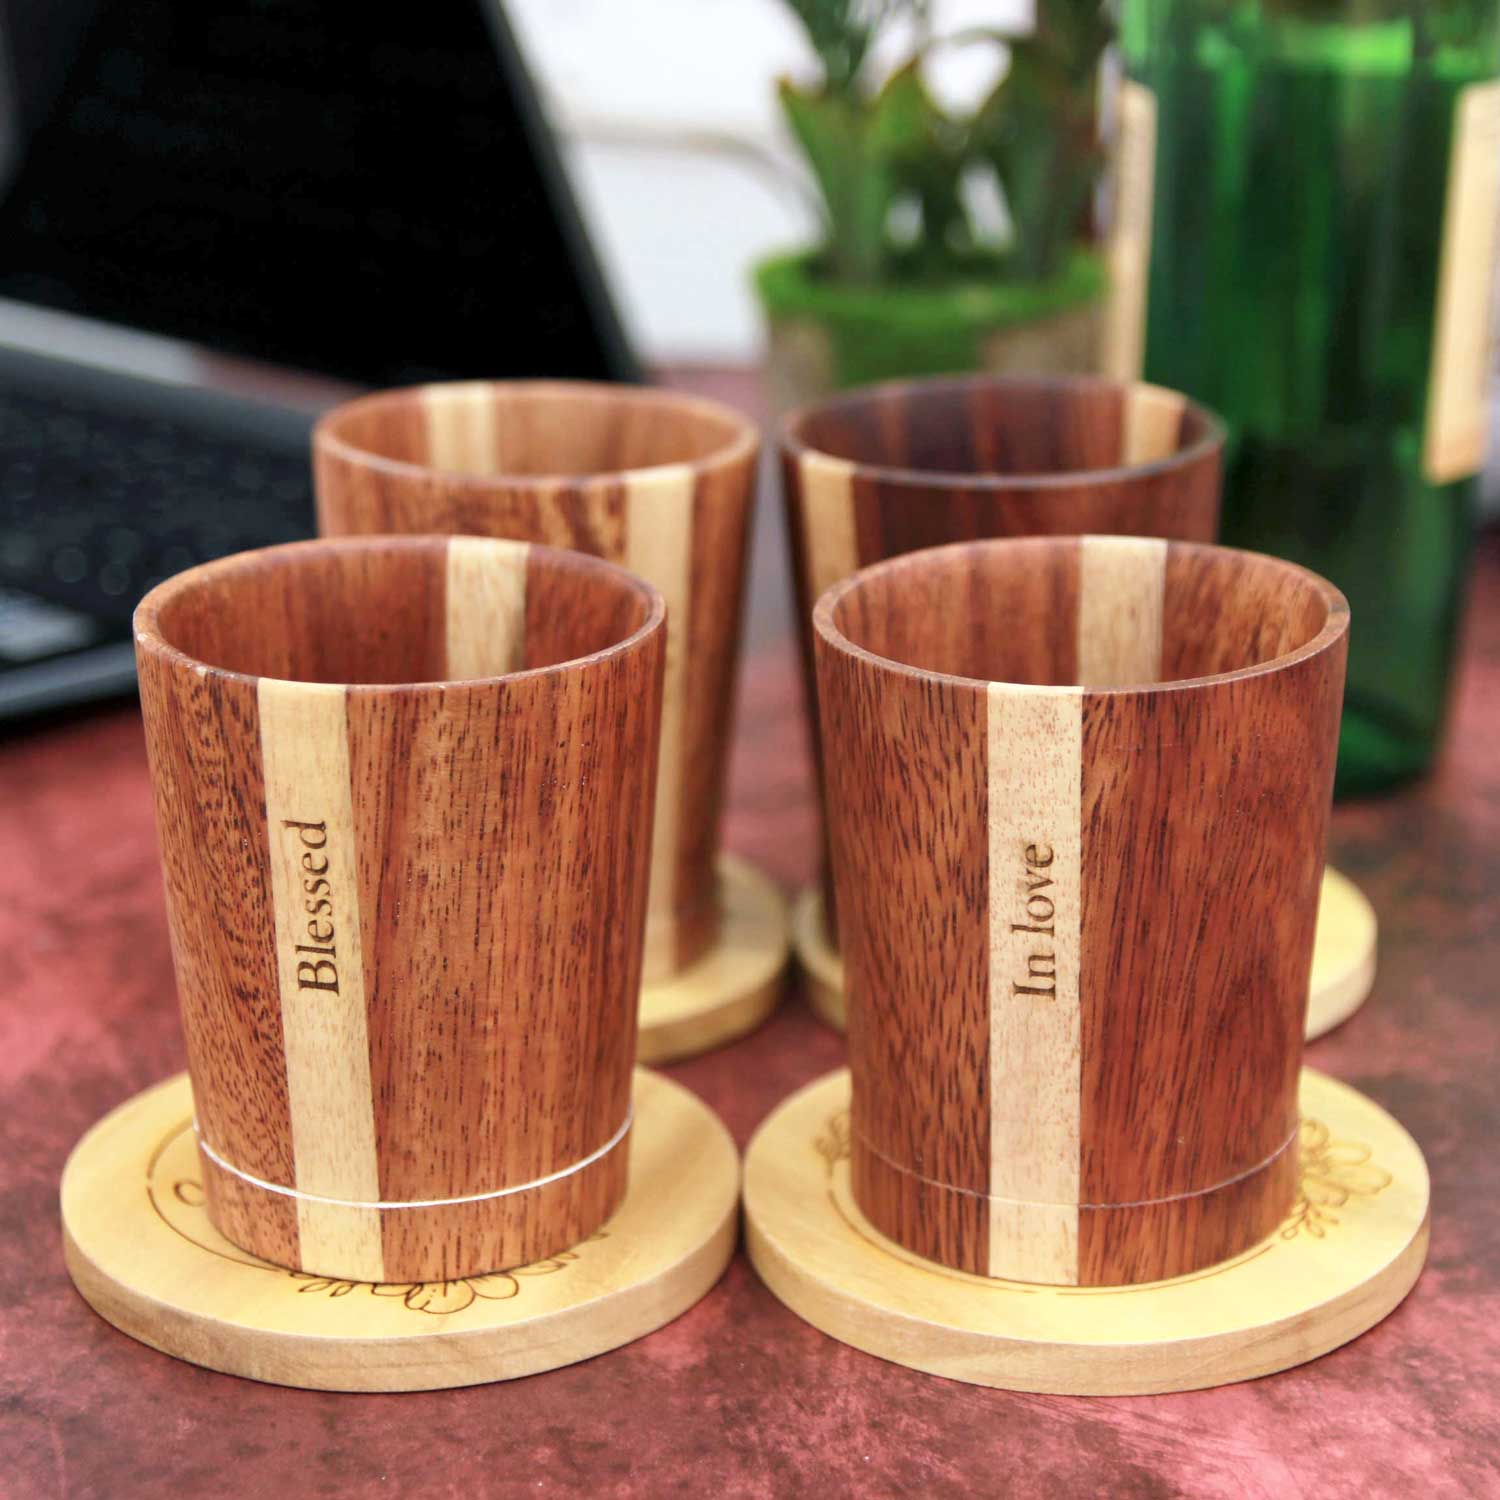 https://cdn.shopify.com/s/files/1/0941/2500/products/Personalized-wood-lowball-small-glasses-engraved-with-message-blessed-in-love-square-1500px_1600x.jpg?v=1659370651